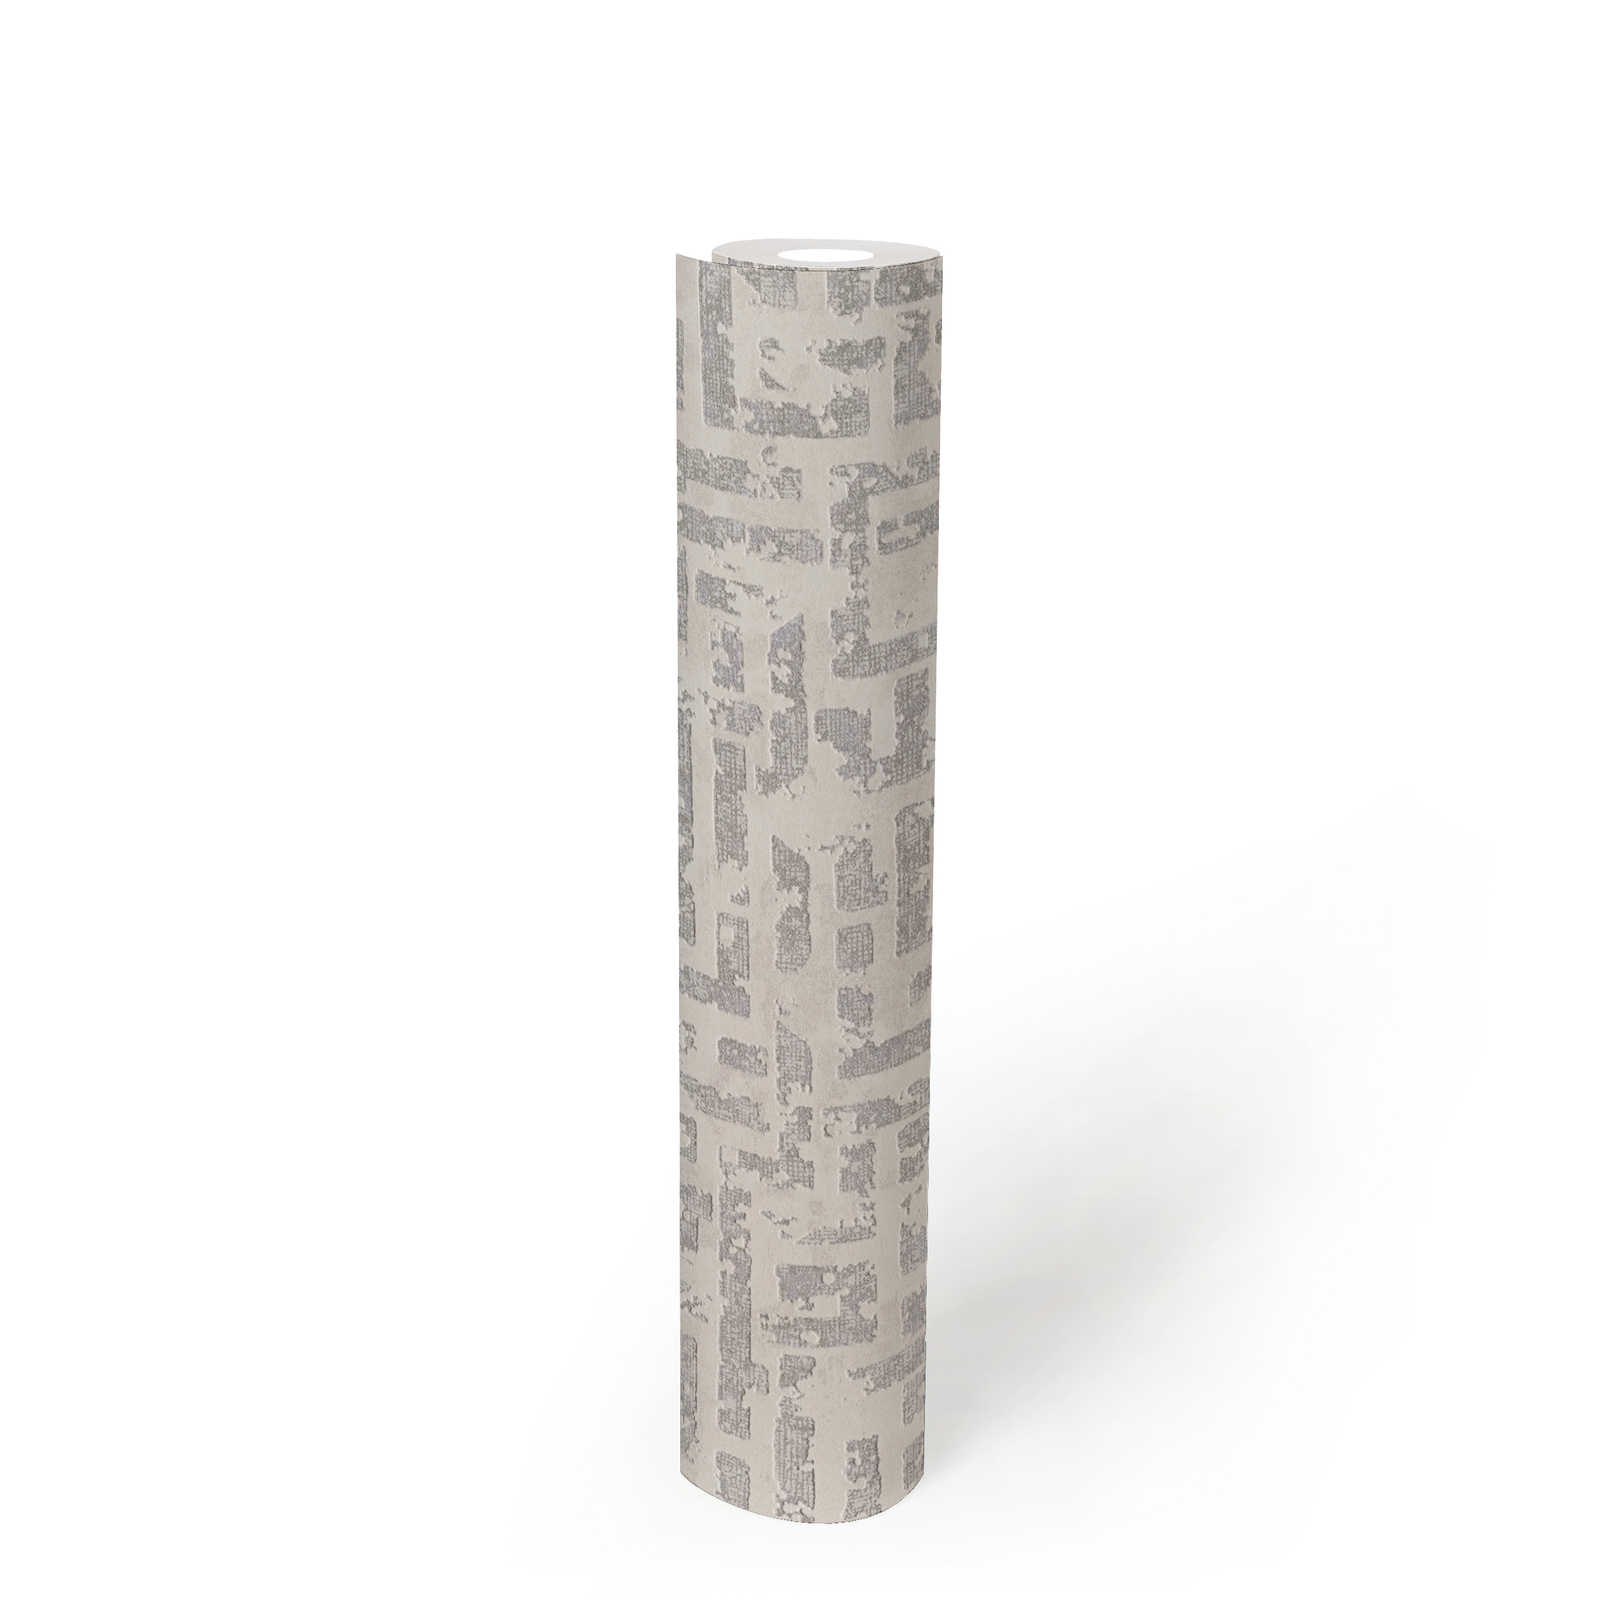             Used look wallpaper with relief pattern - white, metallic, grey
        